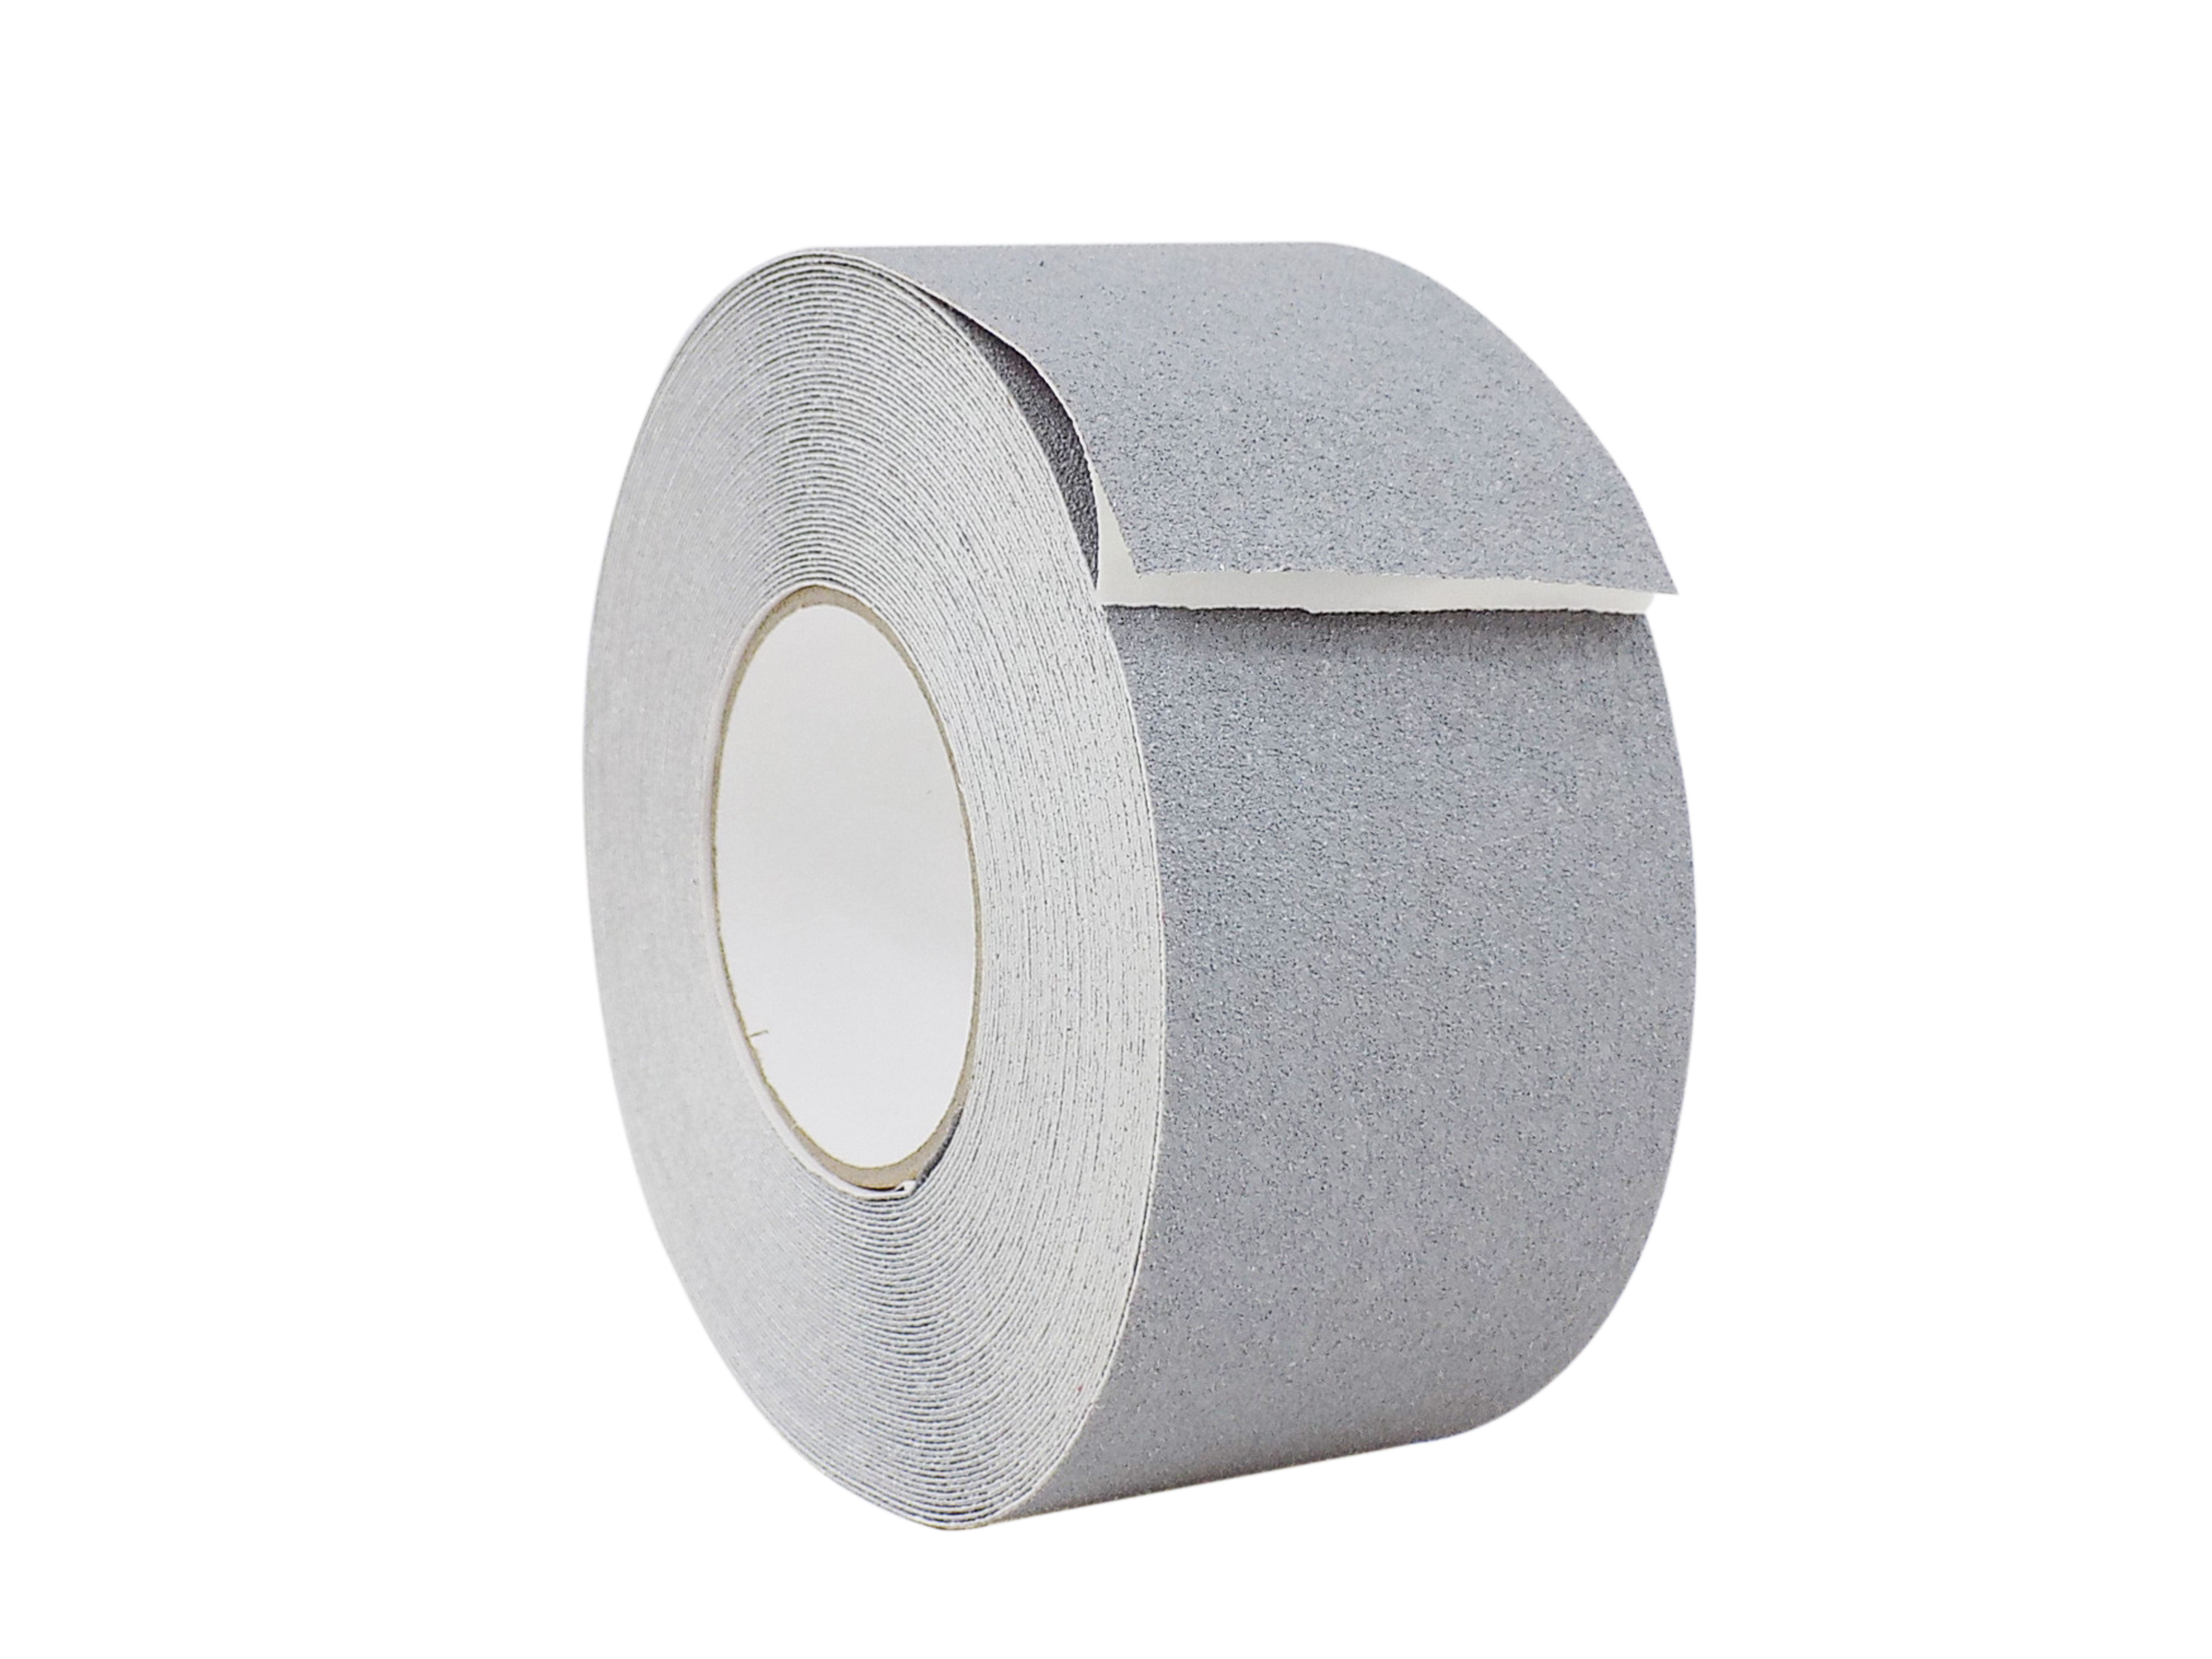 White or Clear Anti Slip Safety Grit Non Slip Tape White - 1 width x 60 long Highest Traction 60 Feet Many Sizes 